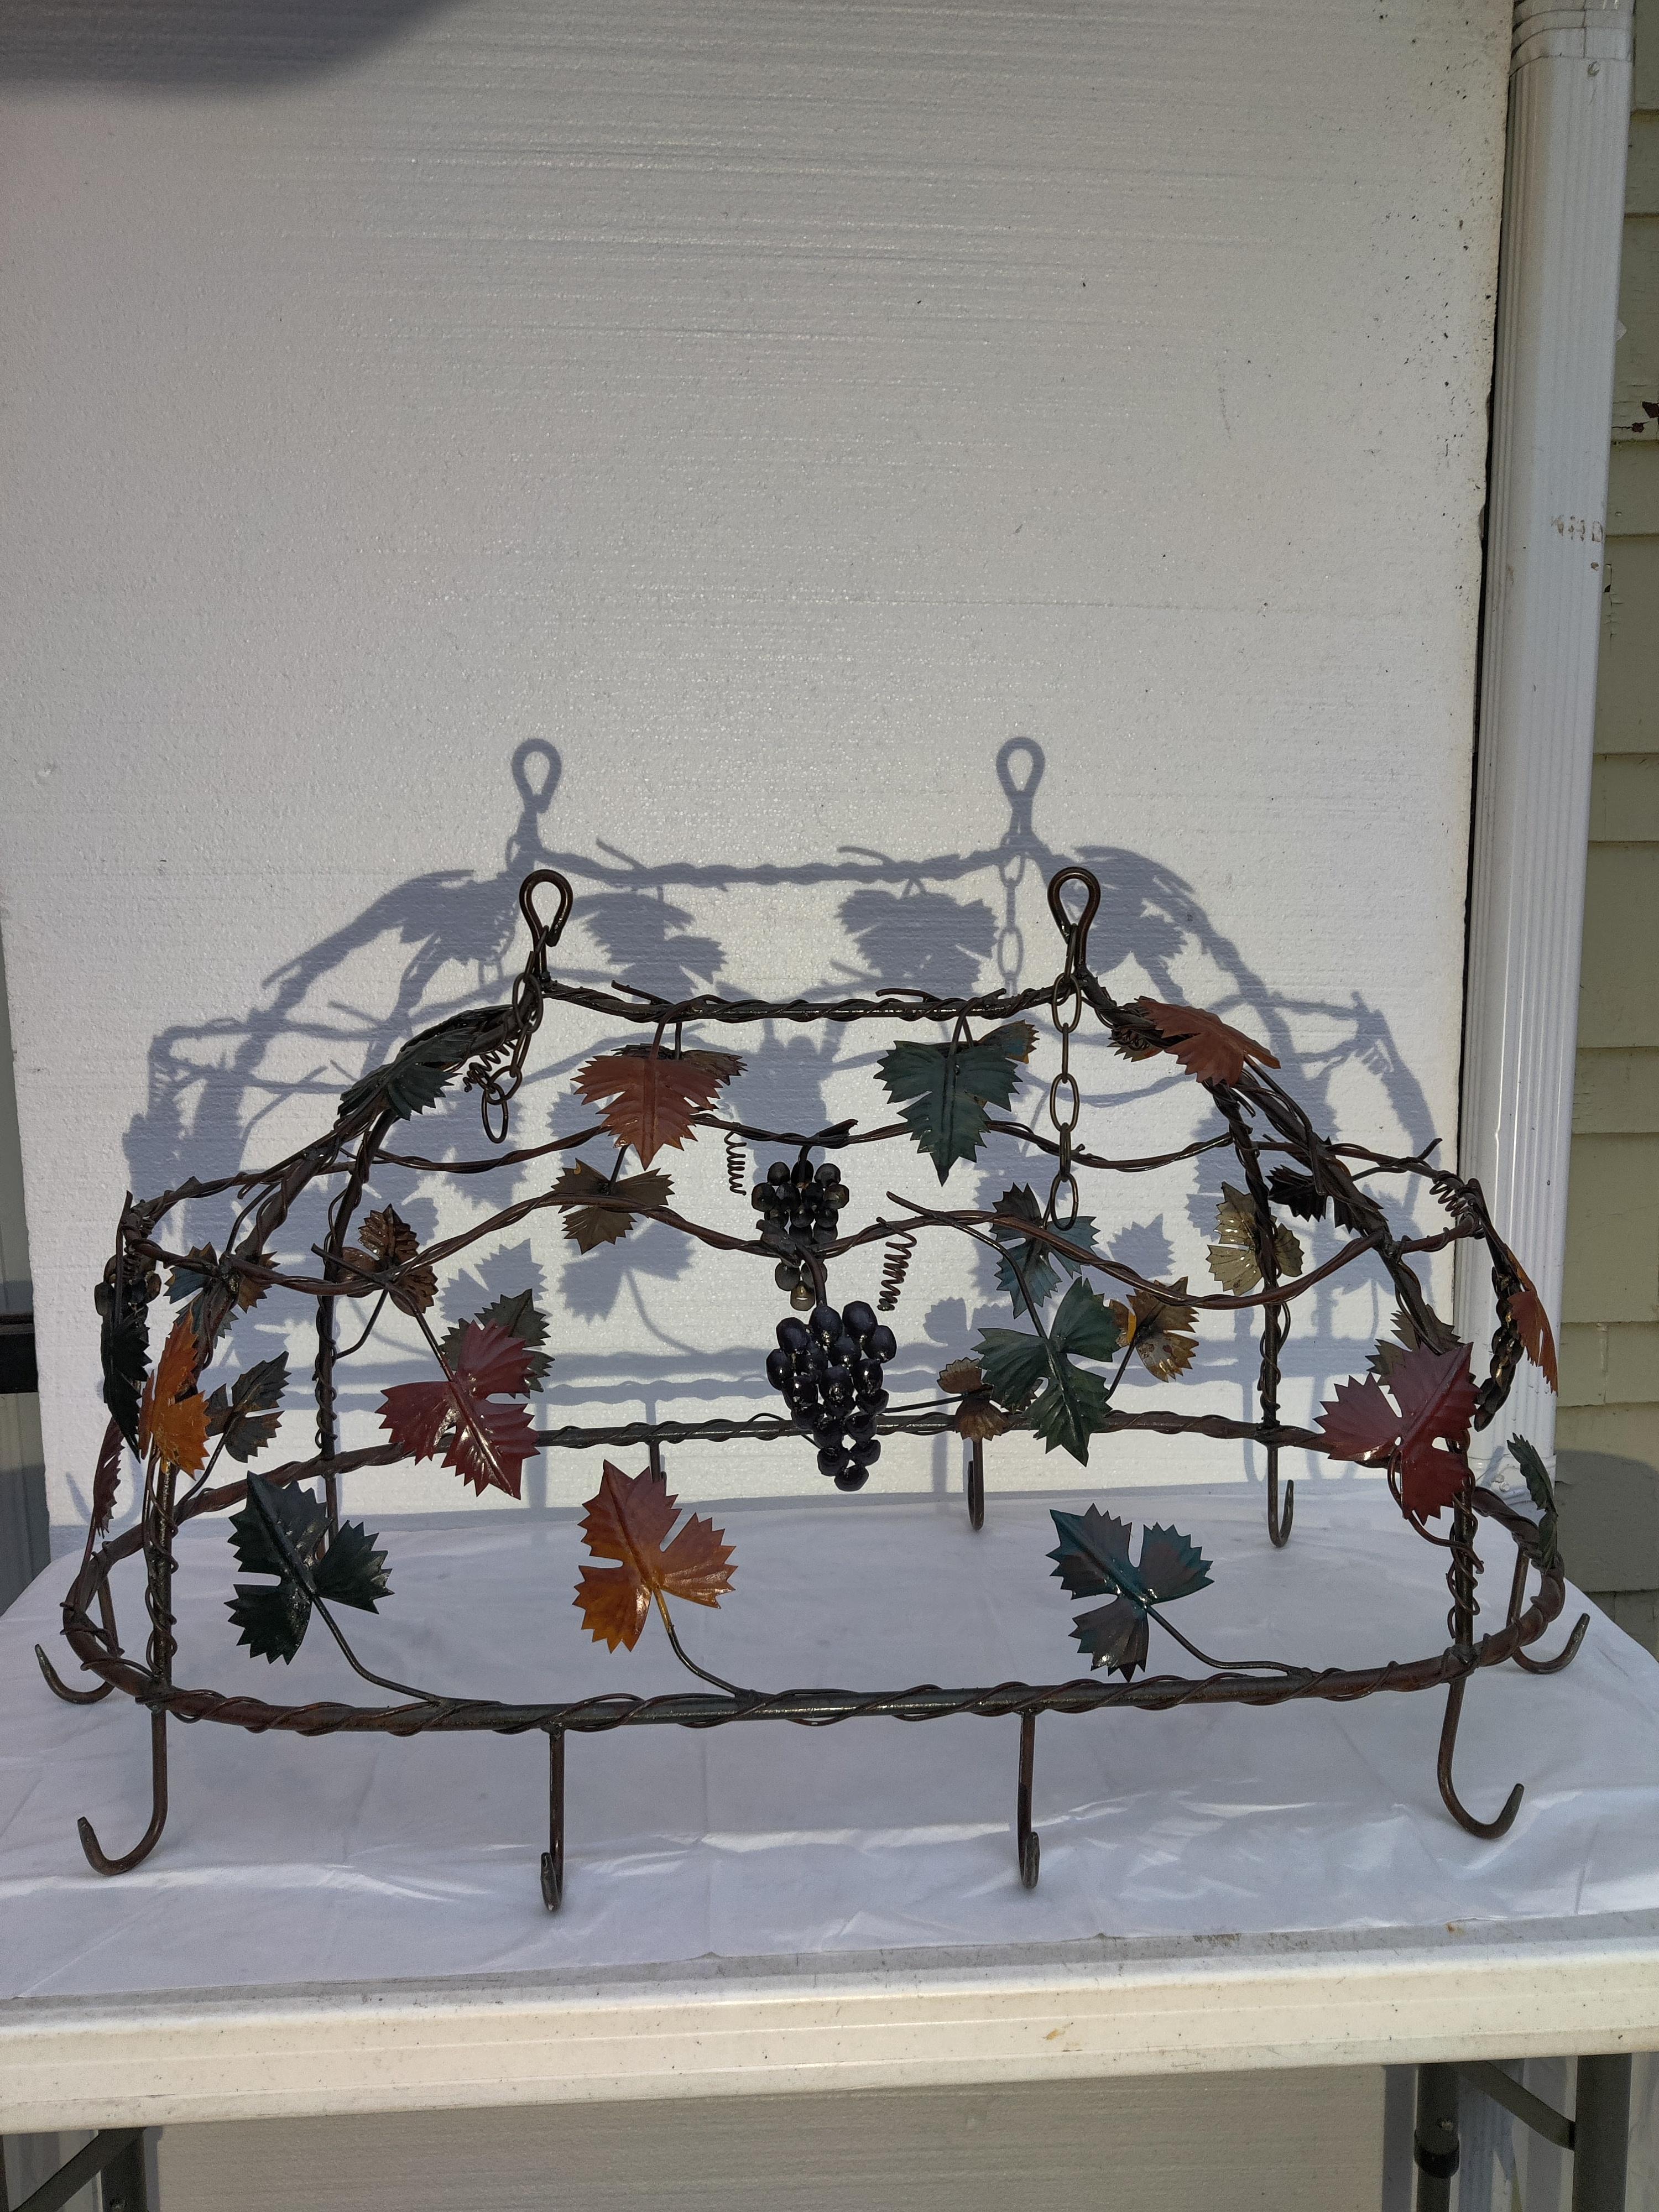 Wrought iron oval shaped pot rack with leaves and grapes
Has 8 hooks
H 18